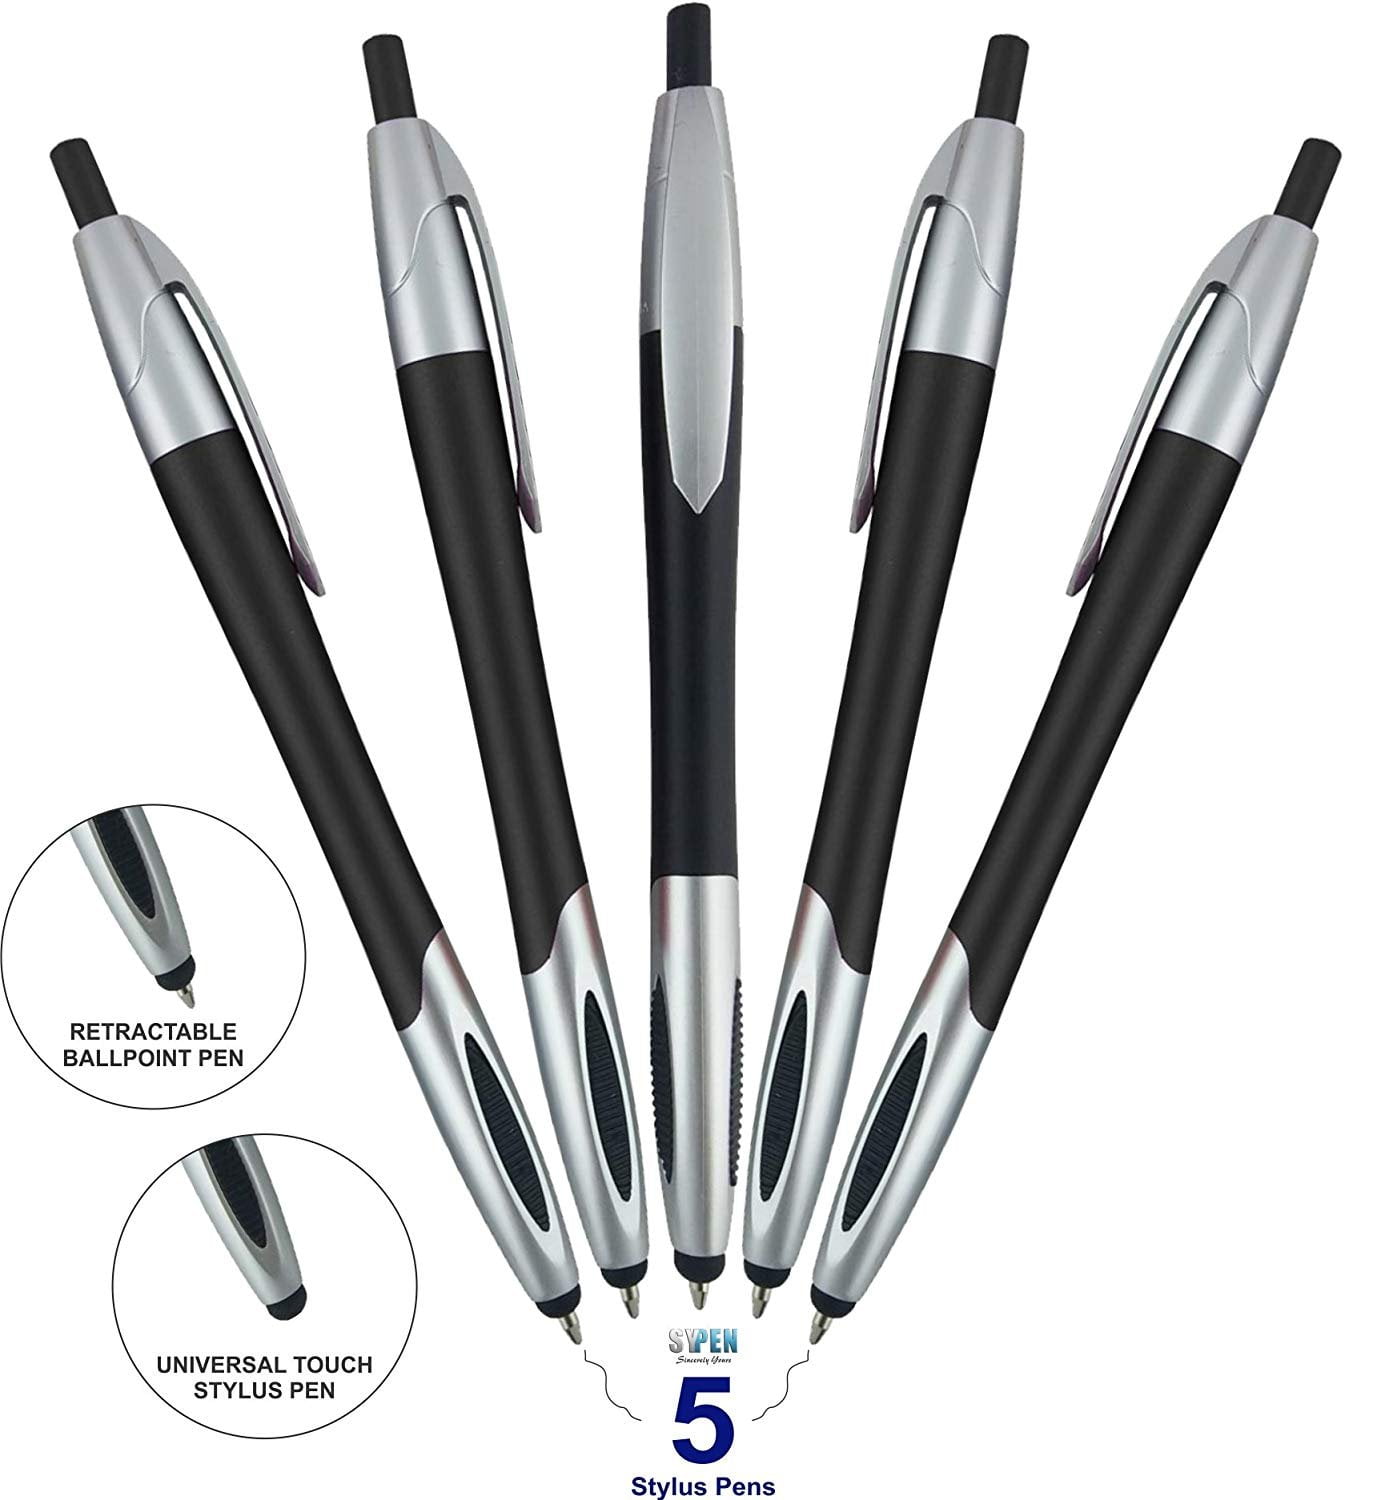 Glorious Polering Elemental Stylus with Ball Point Pen 5 Pack for iPad Mini, iPad 2/3, new iPad, iPhone  5 4S 4 3GS, iPod Touch, Samsung Galaxy - Walmart.com